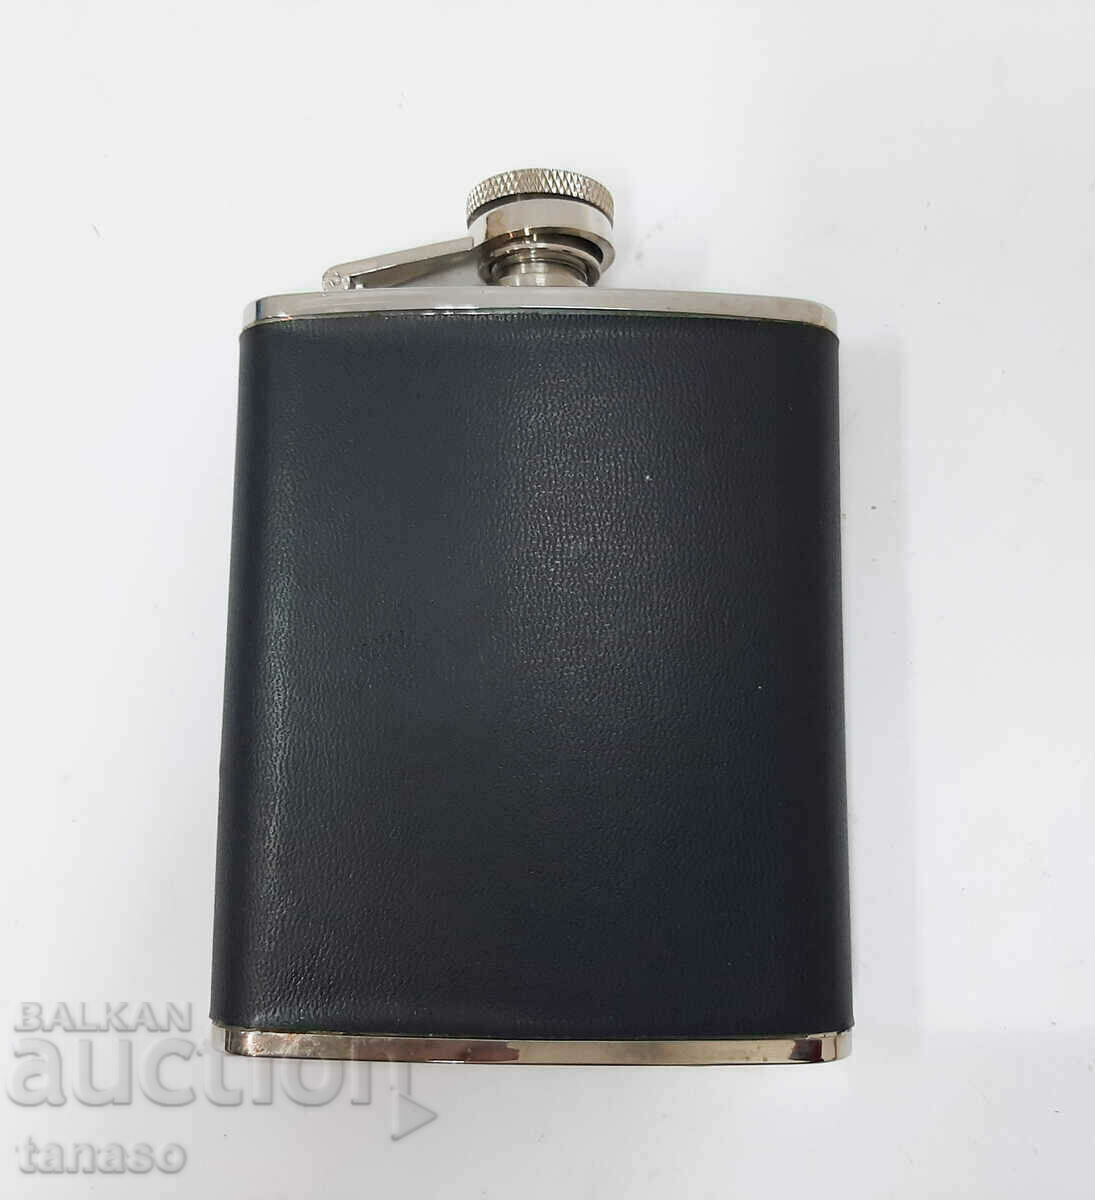 Pocket flask, stainless steel (13.4)